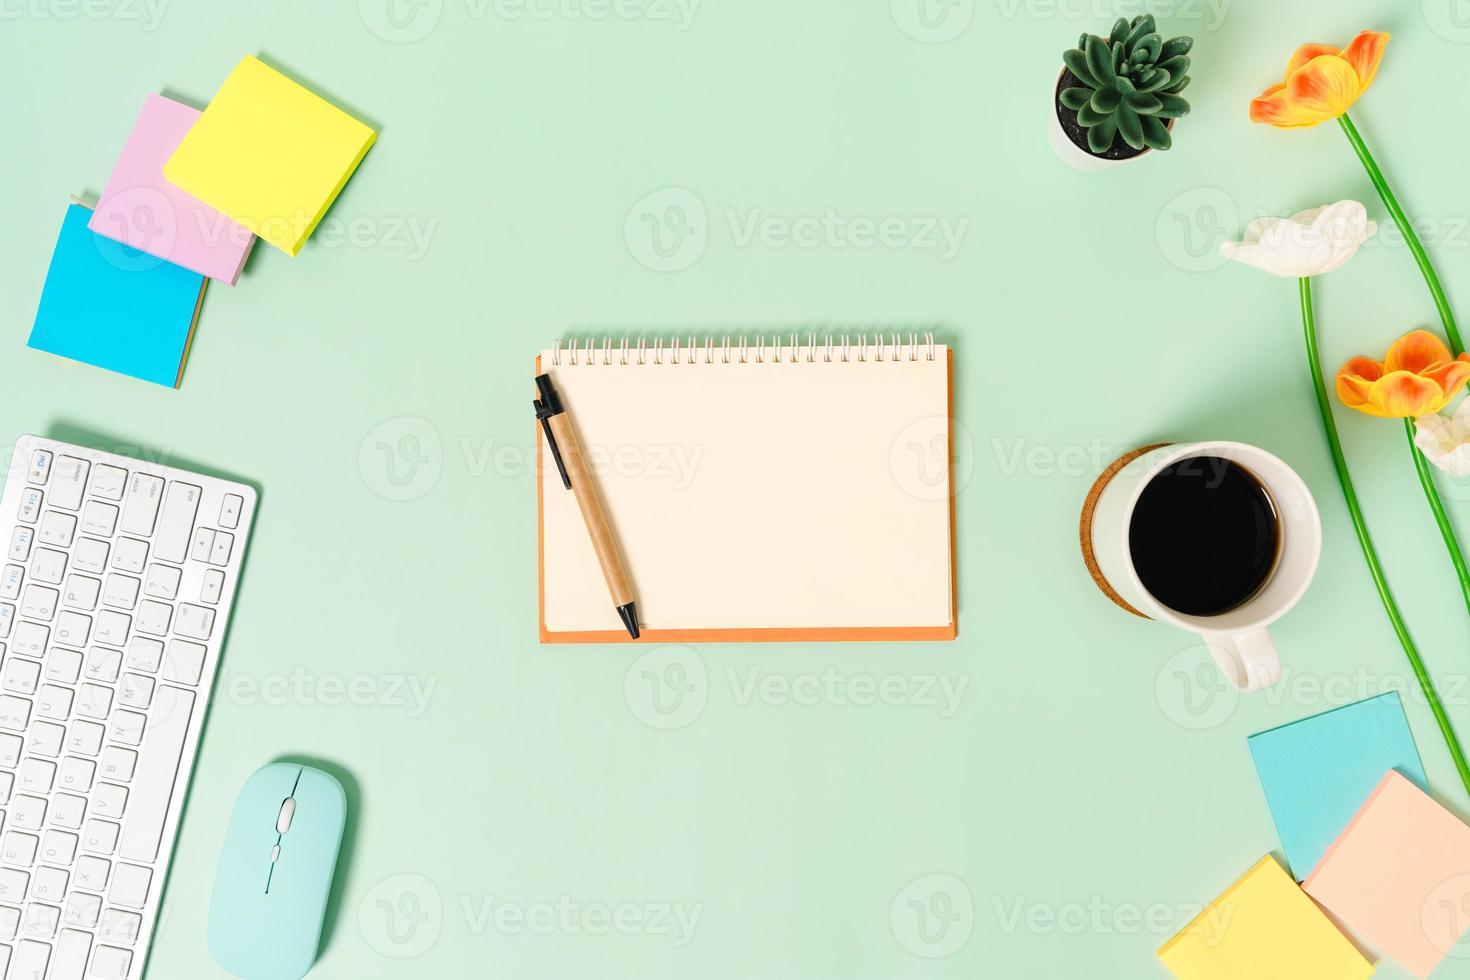 Creative flat lay photo of workspace desk. Top view office desk with keyboard, mouse and open mockup black notebook on pastel green color background. Top view mock up with copy space photography.